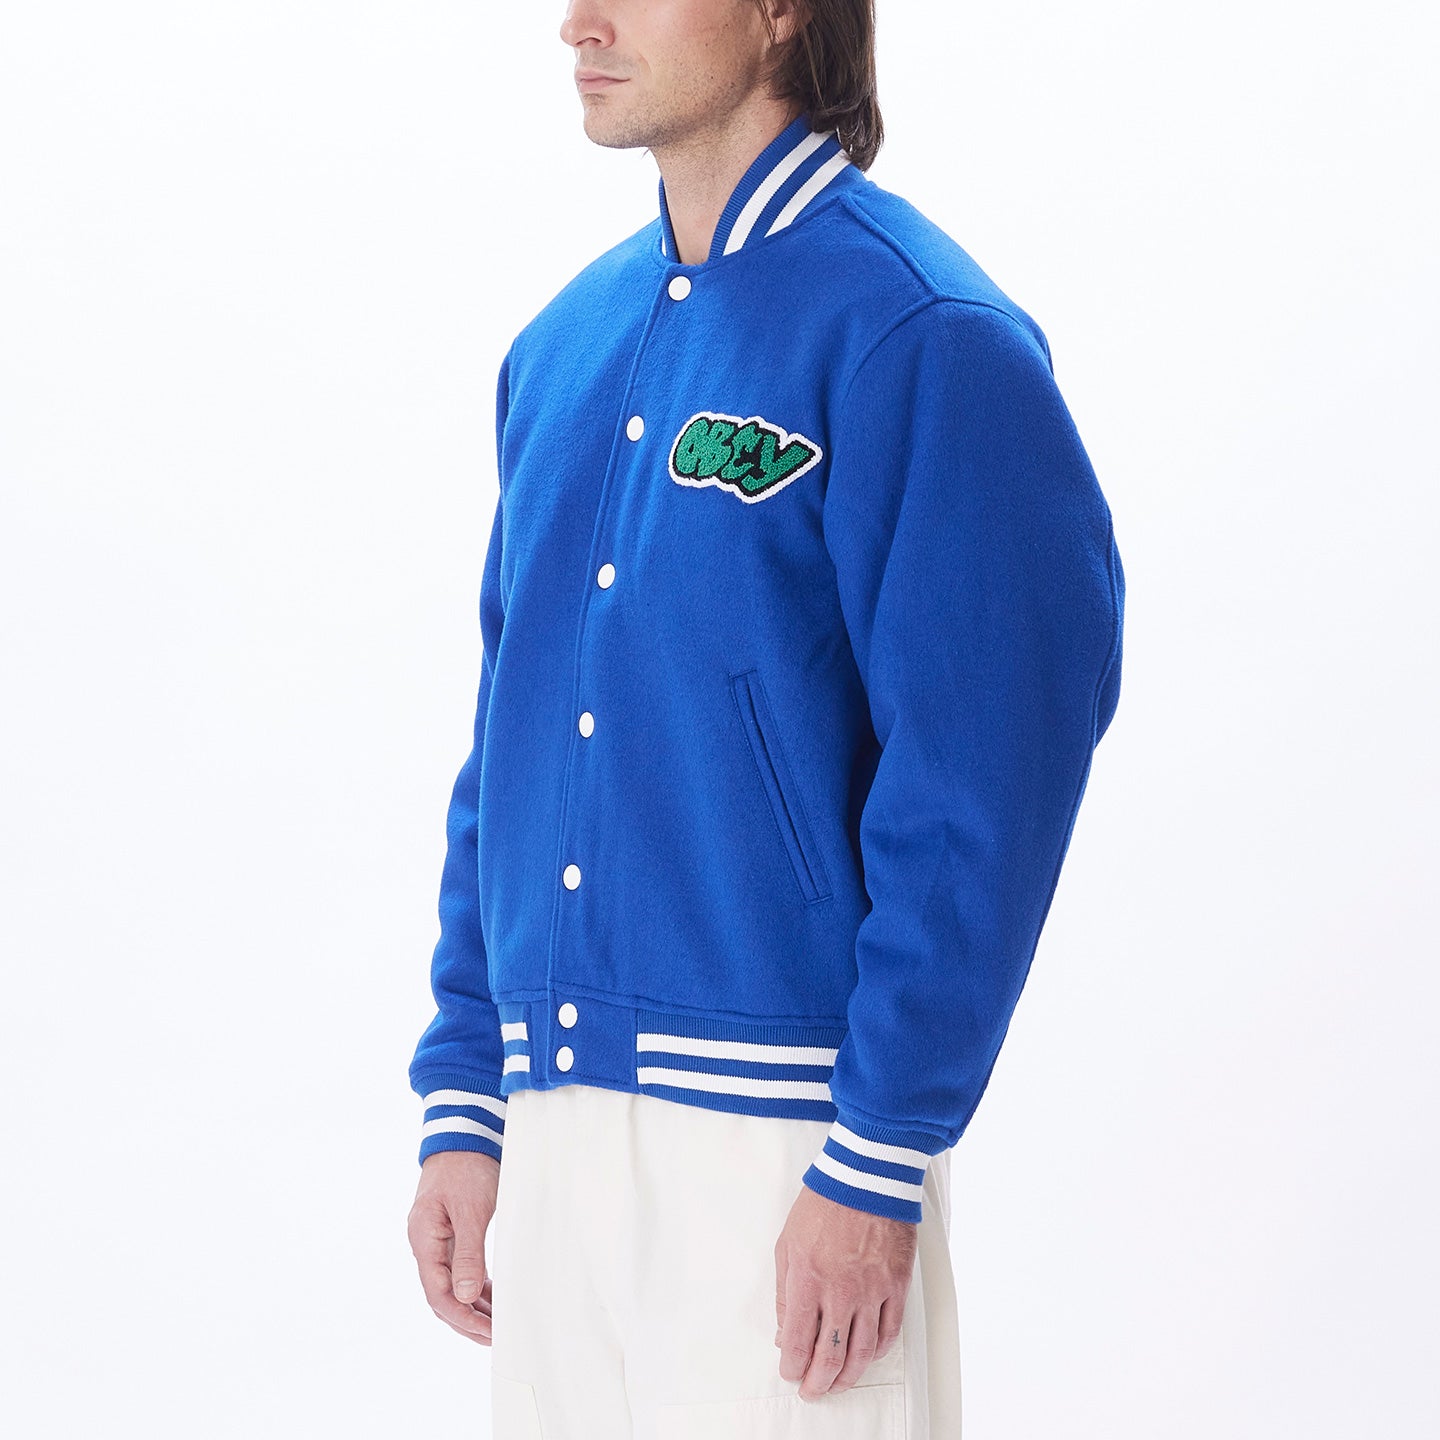 Obey Roll Call Varsity Jacket in Surf Blue